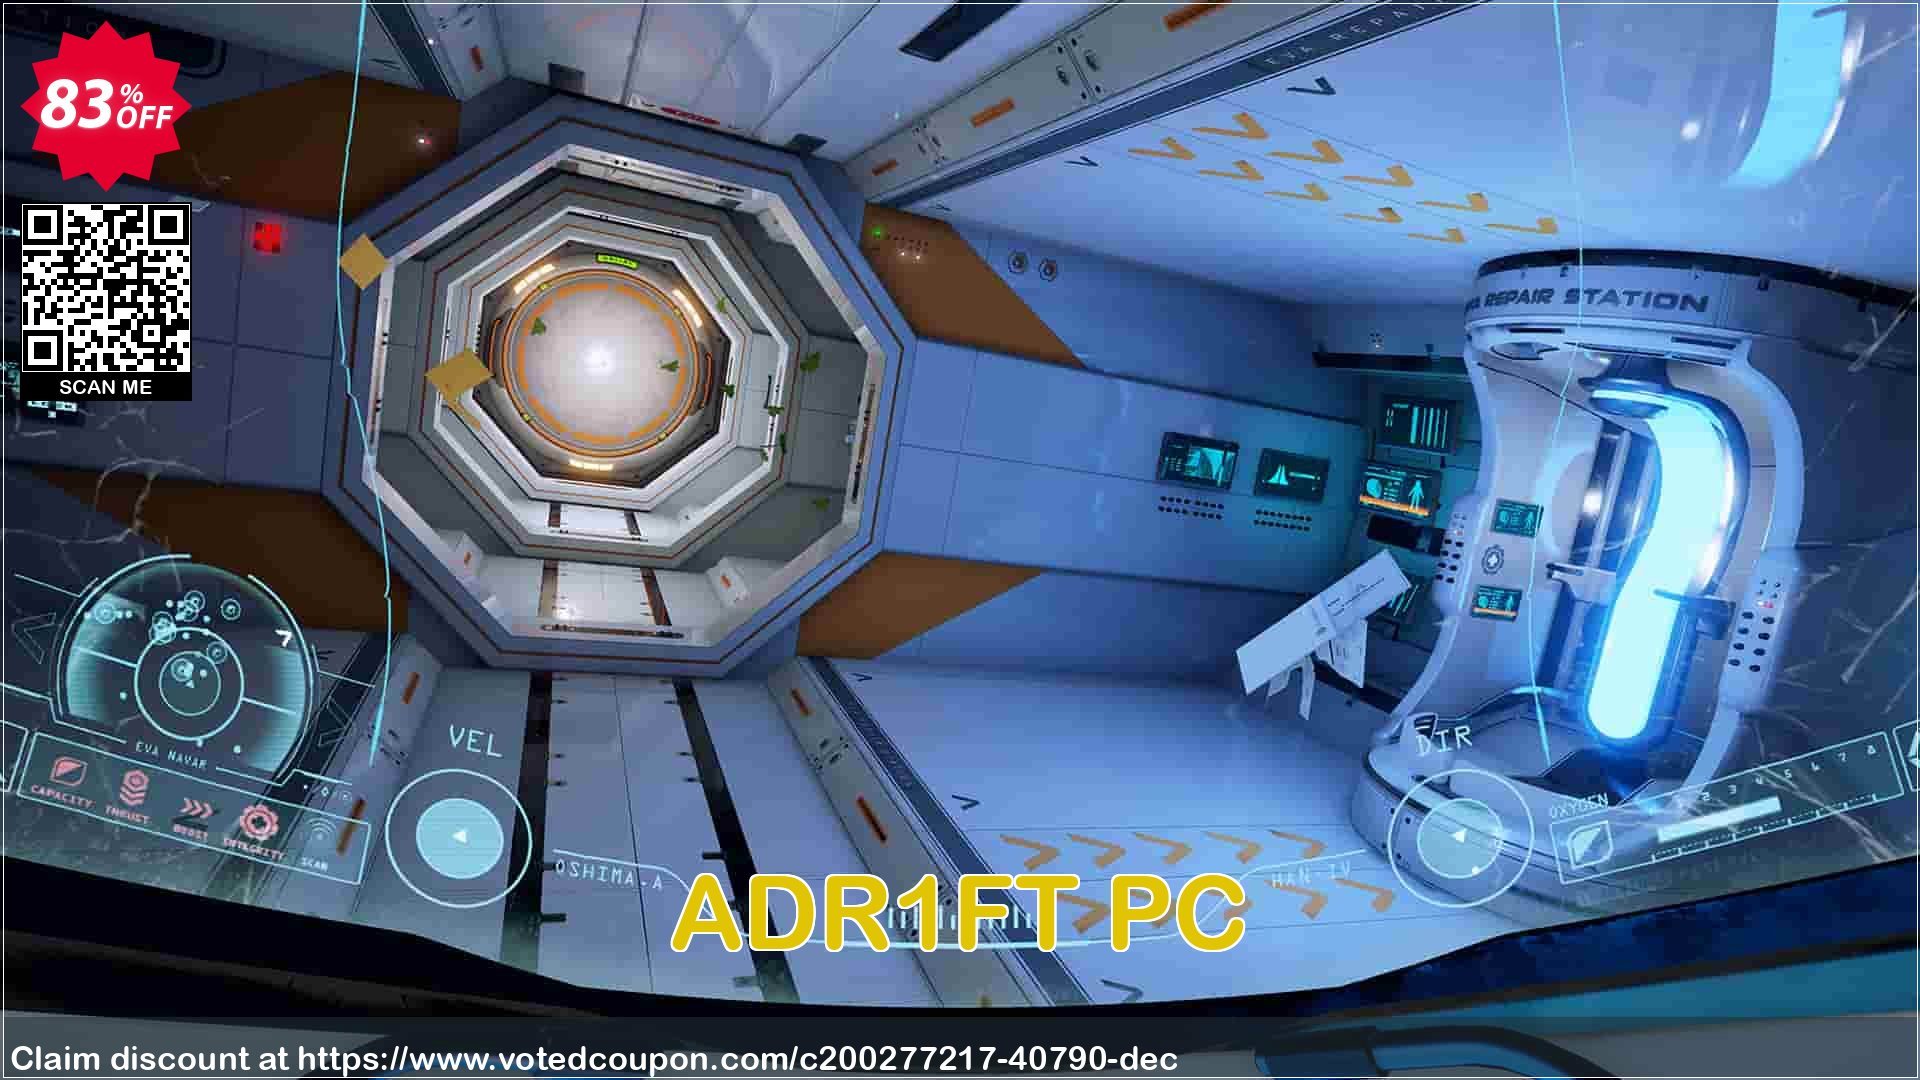 ADR1FT PC Coupon Code May 2024, 83% OFF - VotedCoupon